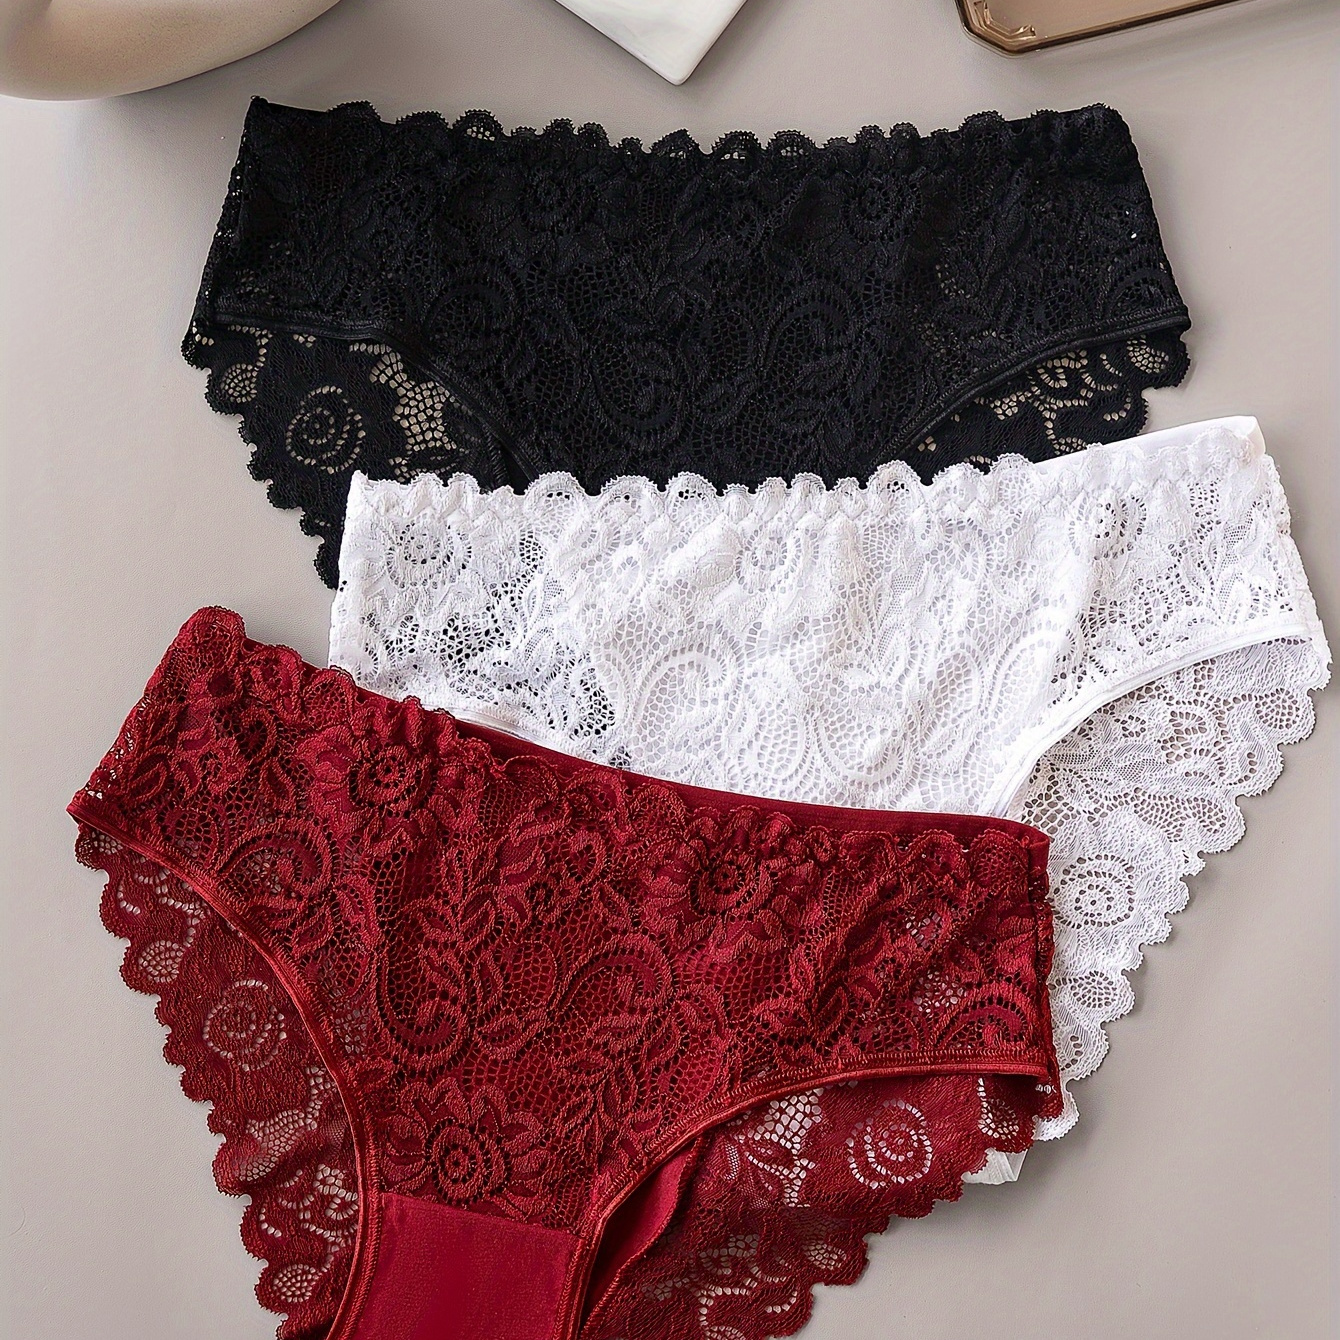 

3pcs Solid Lace Briefs, Comfy Breathable Stretchy Intimates Panties, Women's Lingerie & Underwear